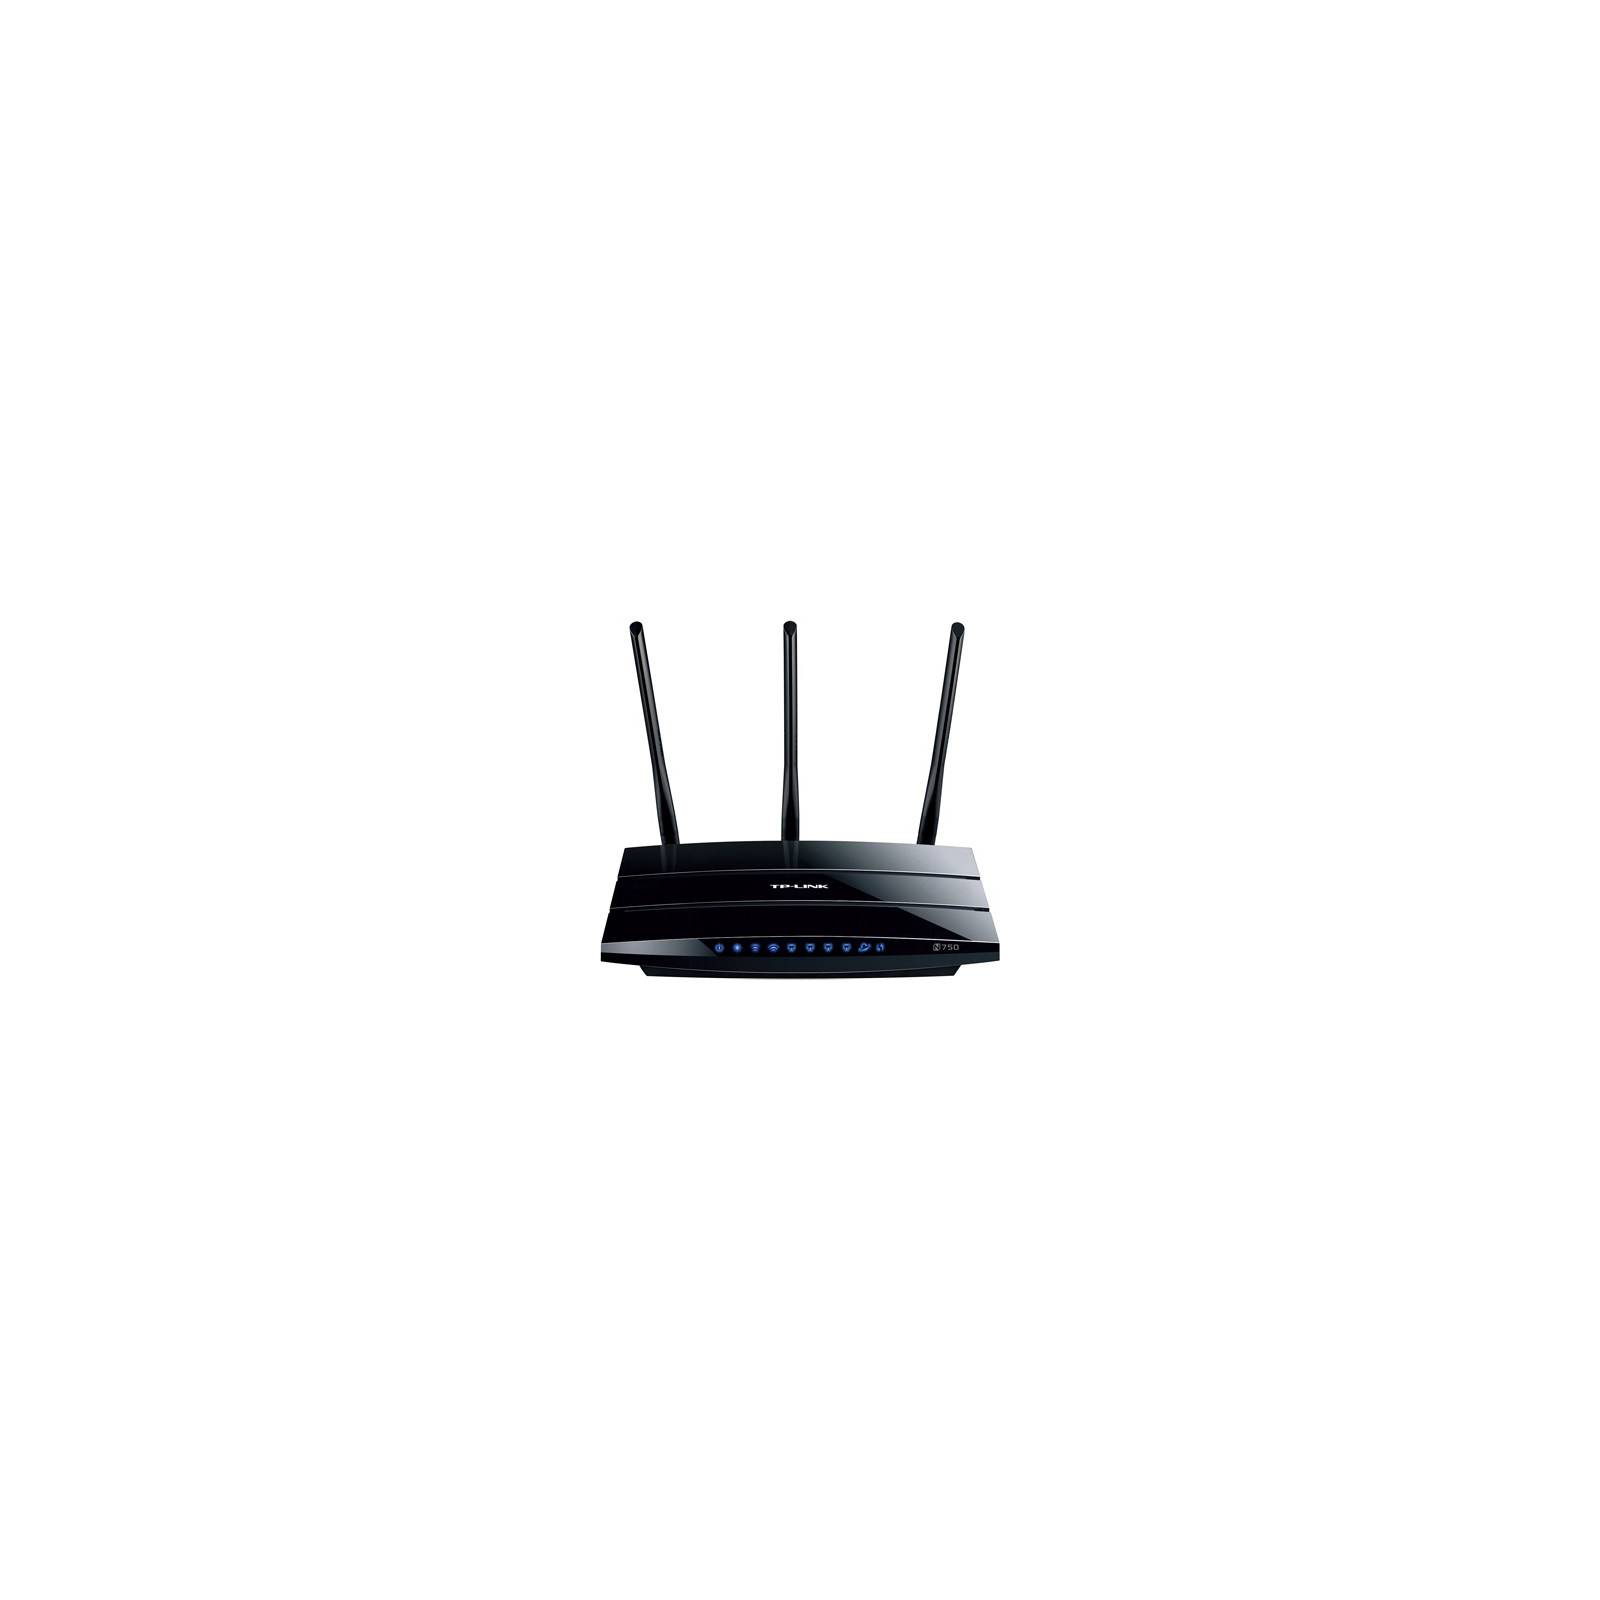 Маршрутизатор TP-Link TL-WDR4300